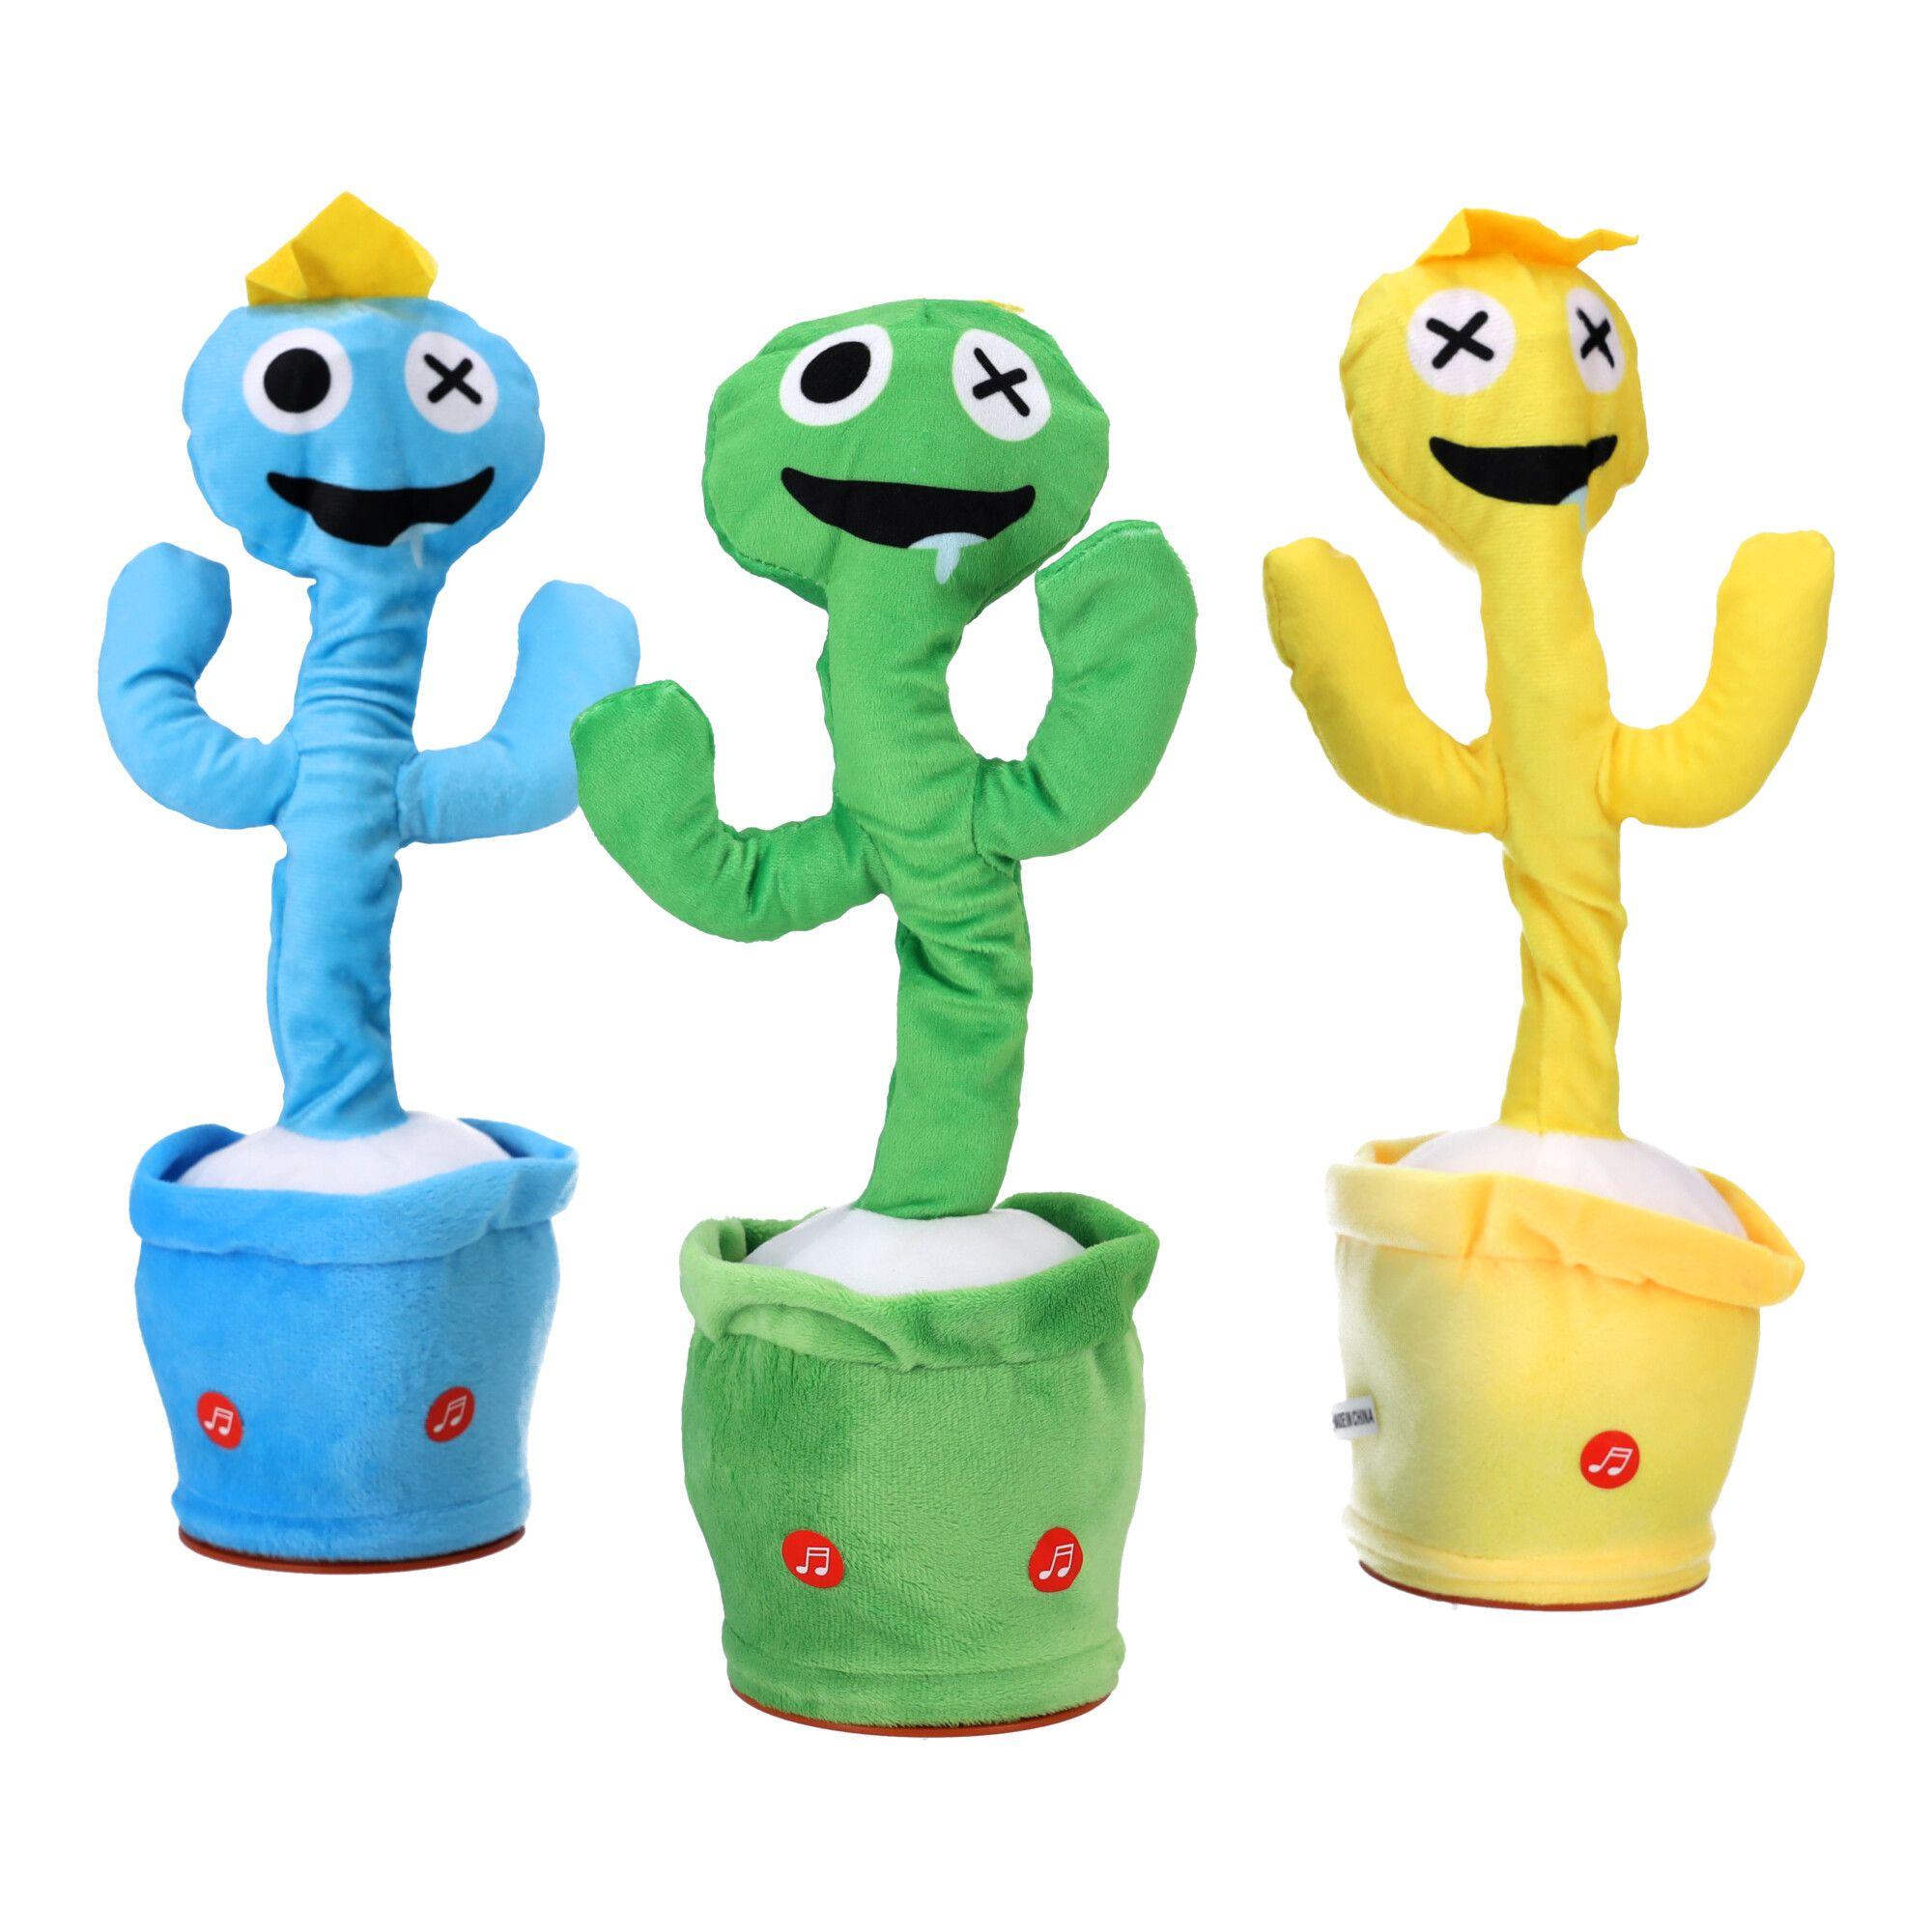 ROBLOX RAINBOW FRIENDS Green Blue Plush Toys For A Fun And Happy